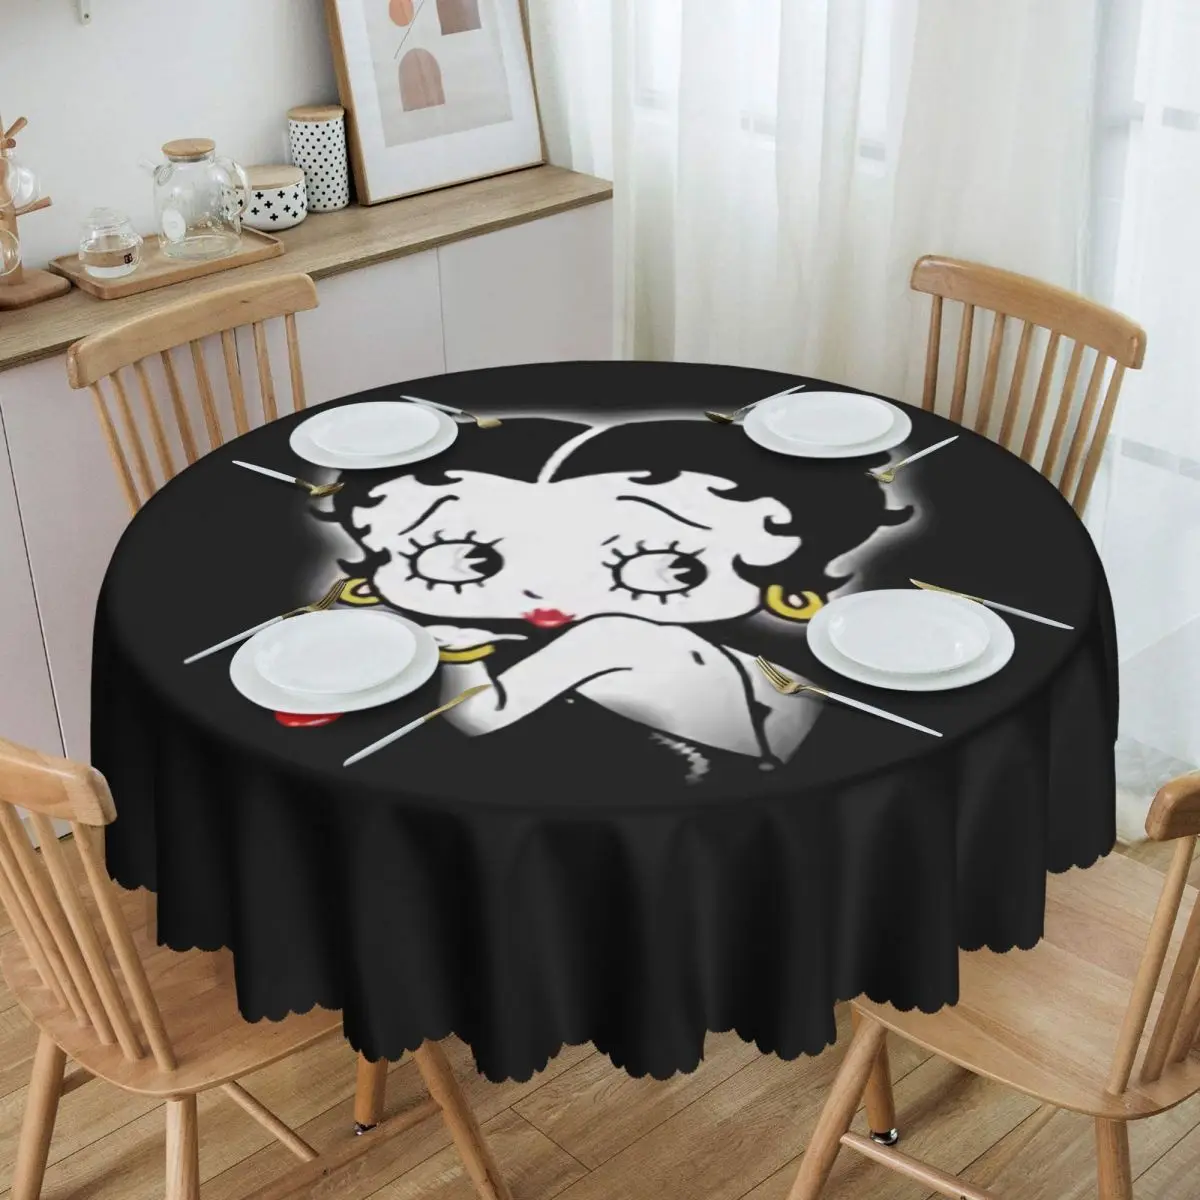 

Round Bettys Boop Table Cloth Oilproof Tablecloth 60 inch Table Cover for Kitchen Dinning